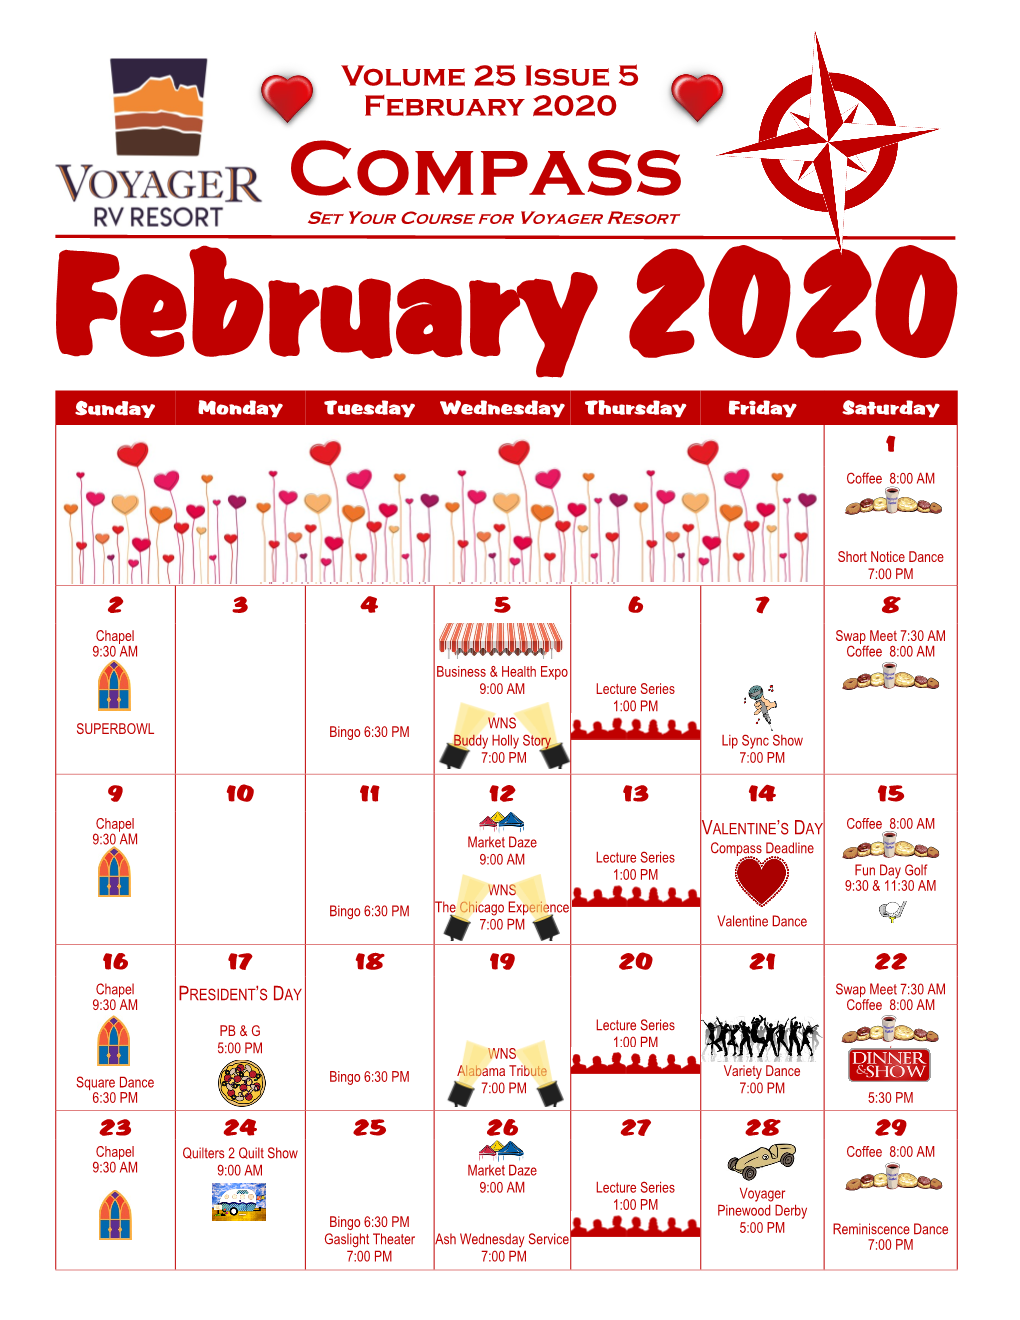 February 2020 Compass SET YOUR COURSE for VOYAGER RESORT